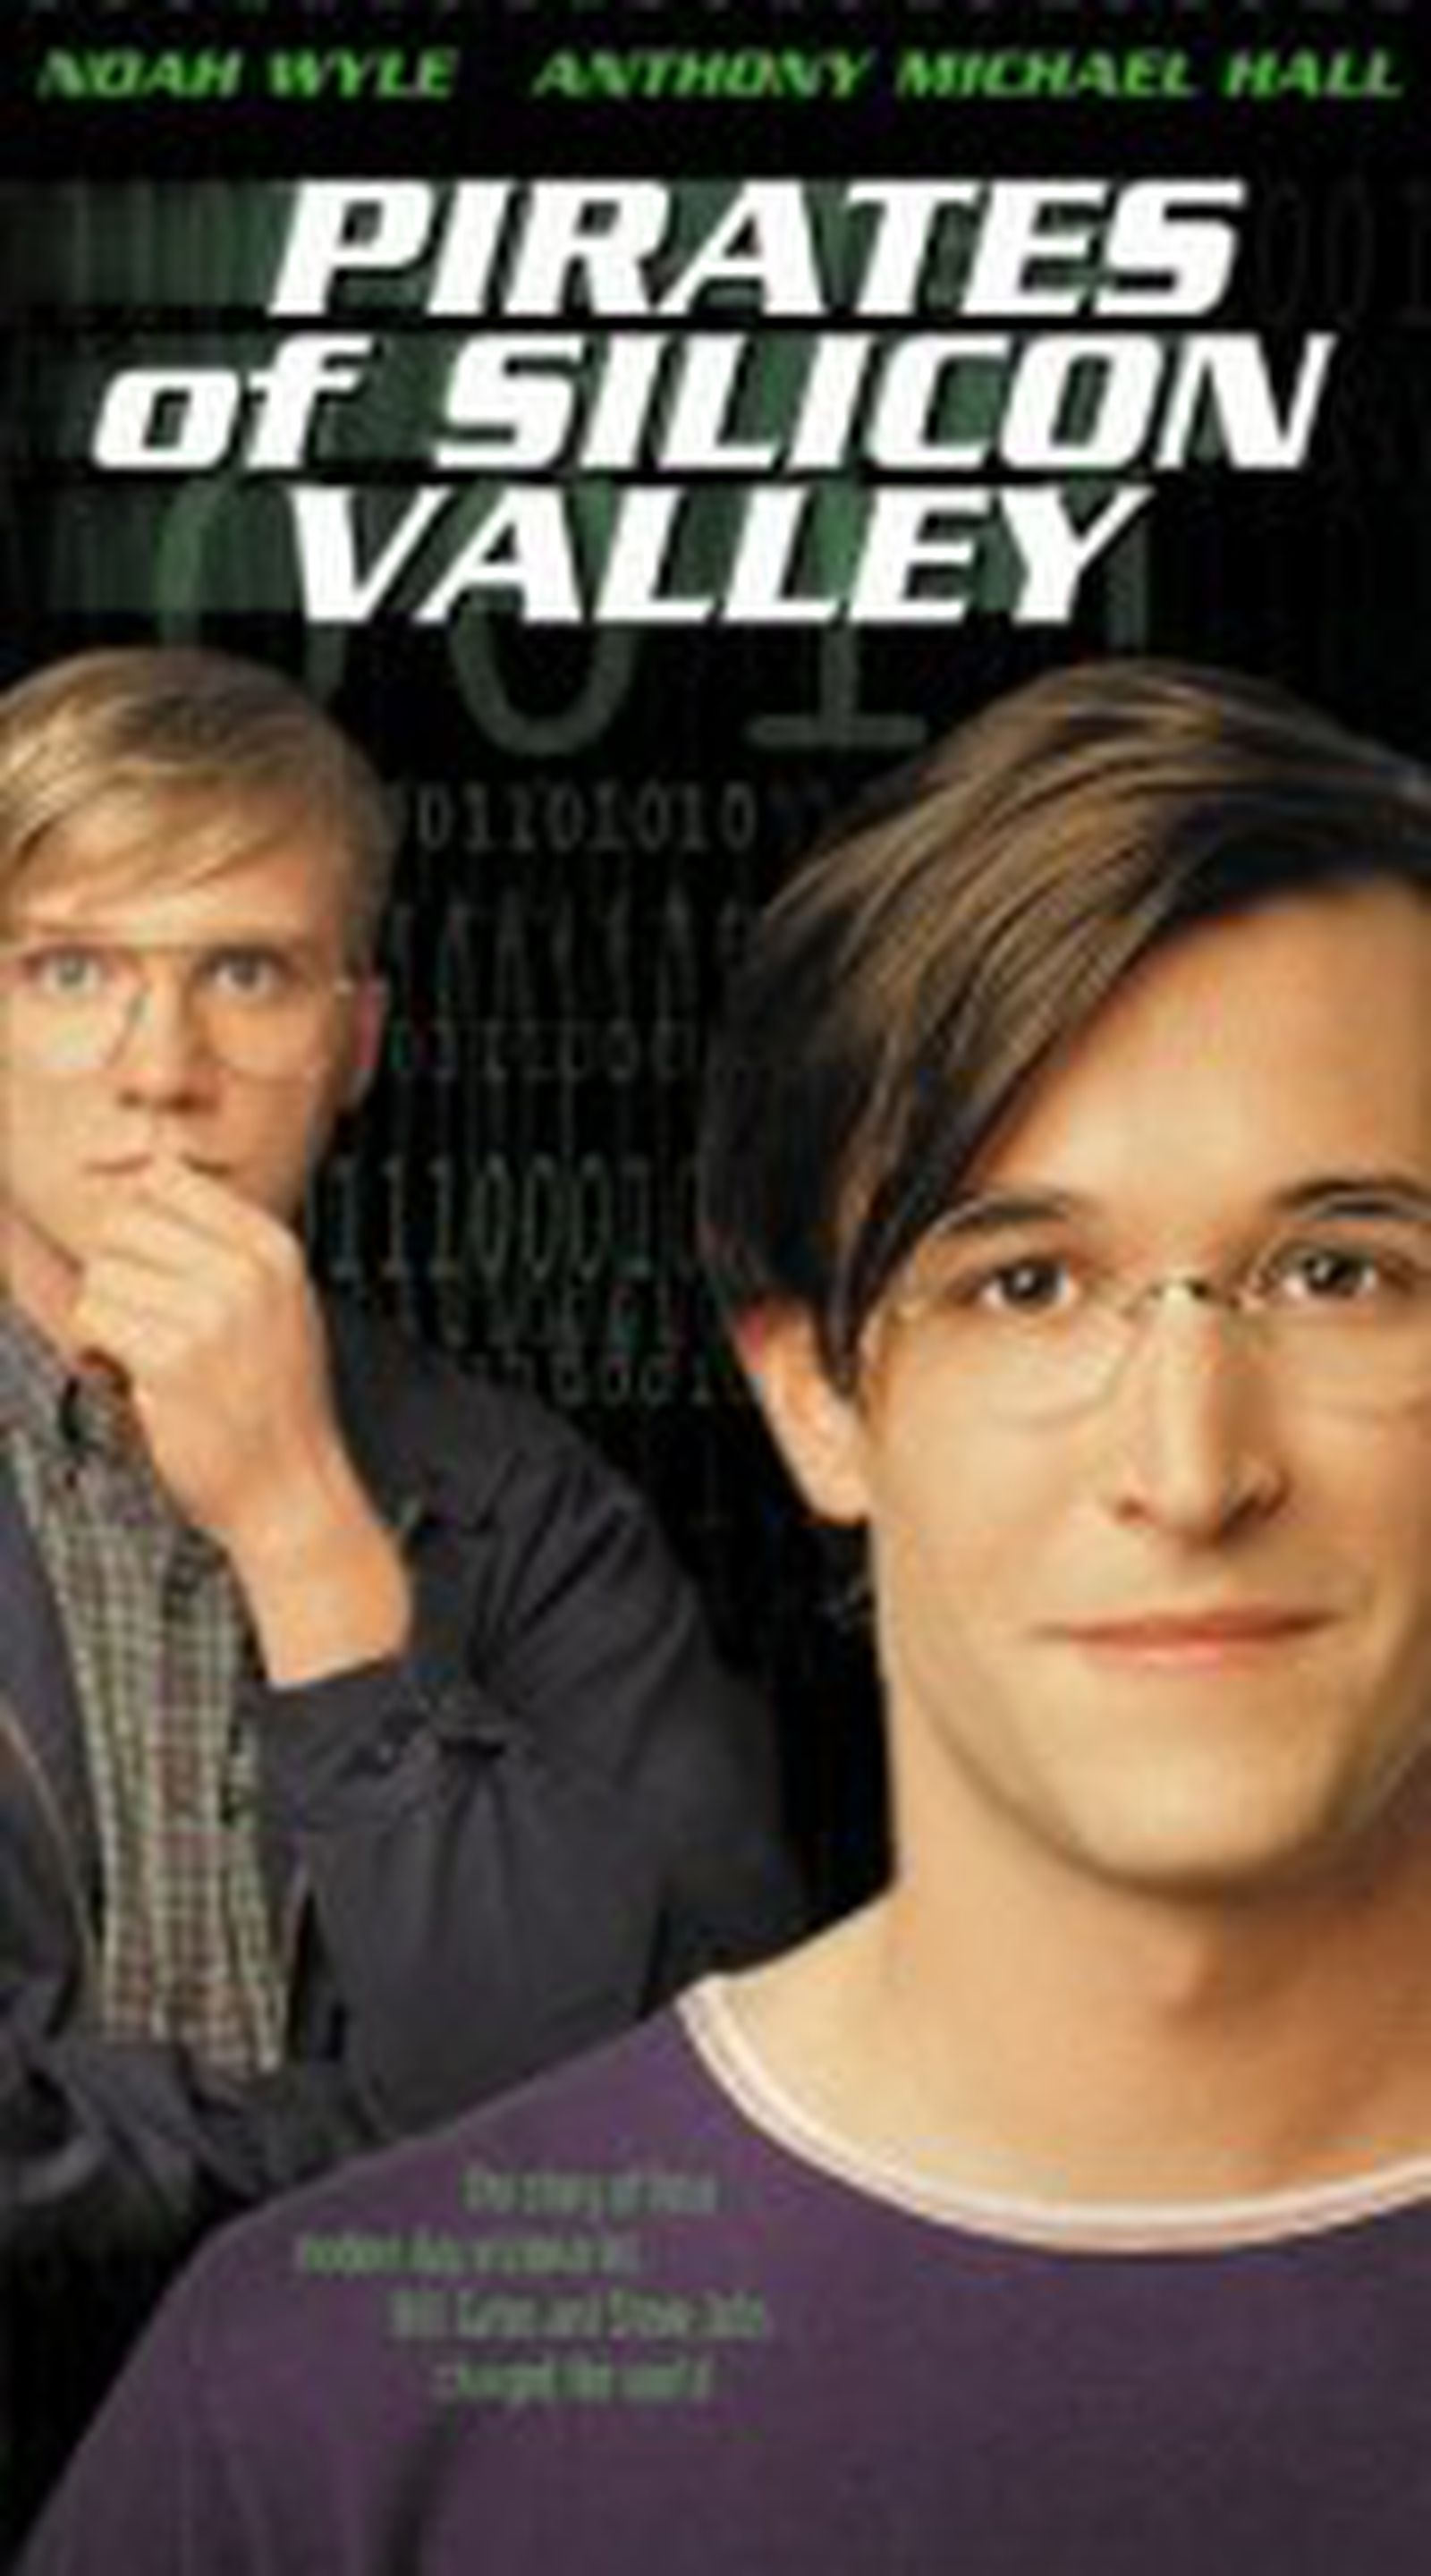 pirates of silicon valley review